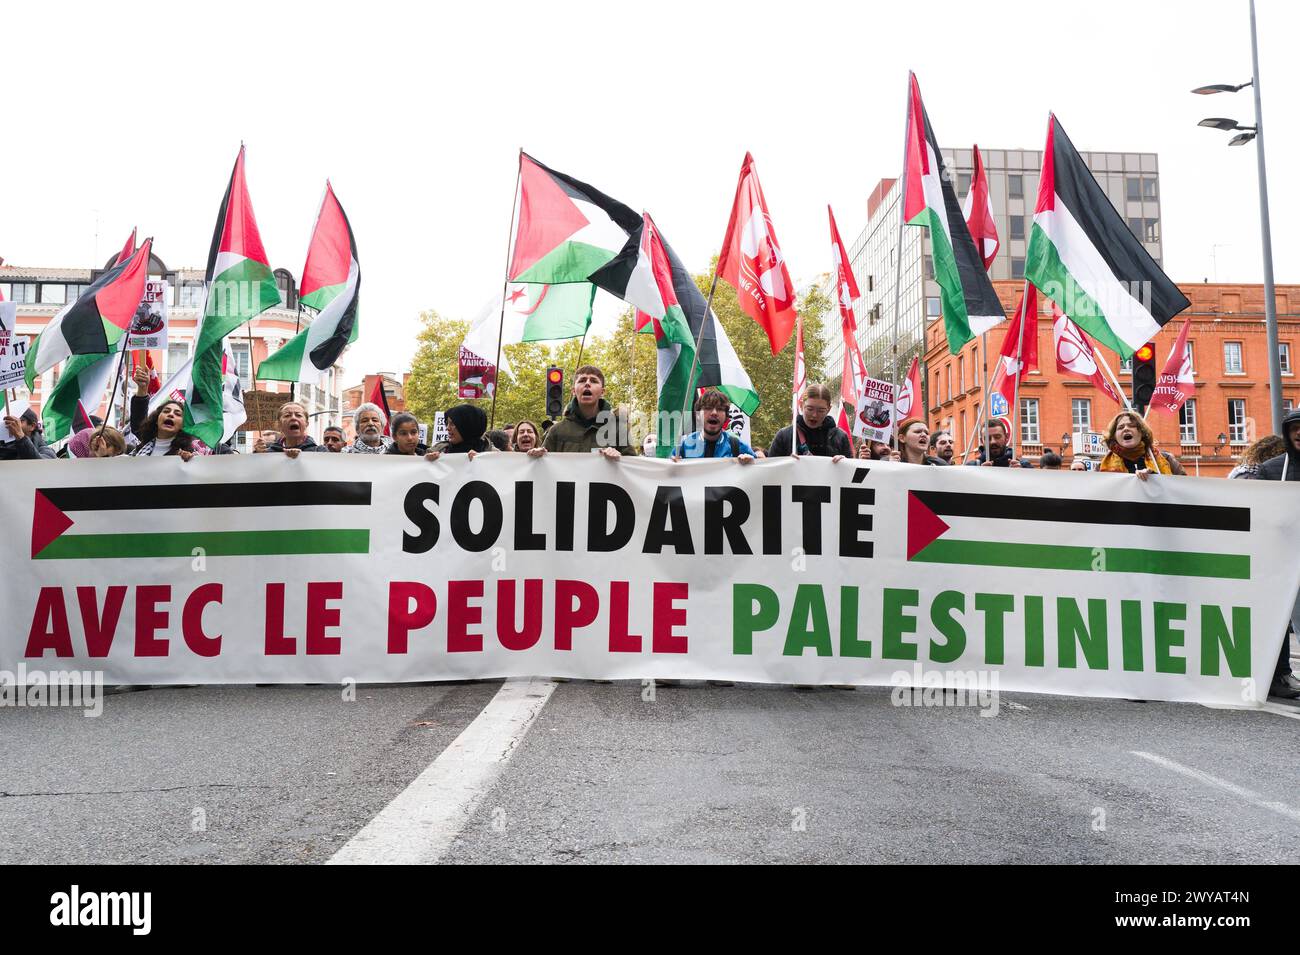 At the start of the demonstration at Jean-Jaures metro station, activists with flags behind the banner, Solidarite avec le peuple palestinien. Stock Photo